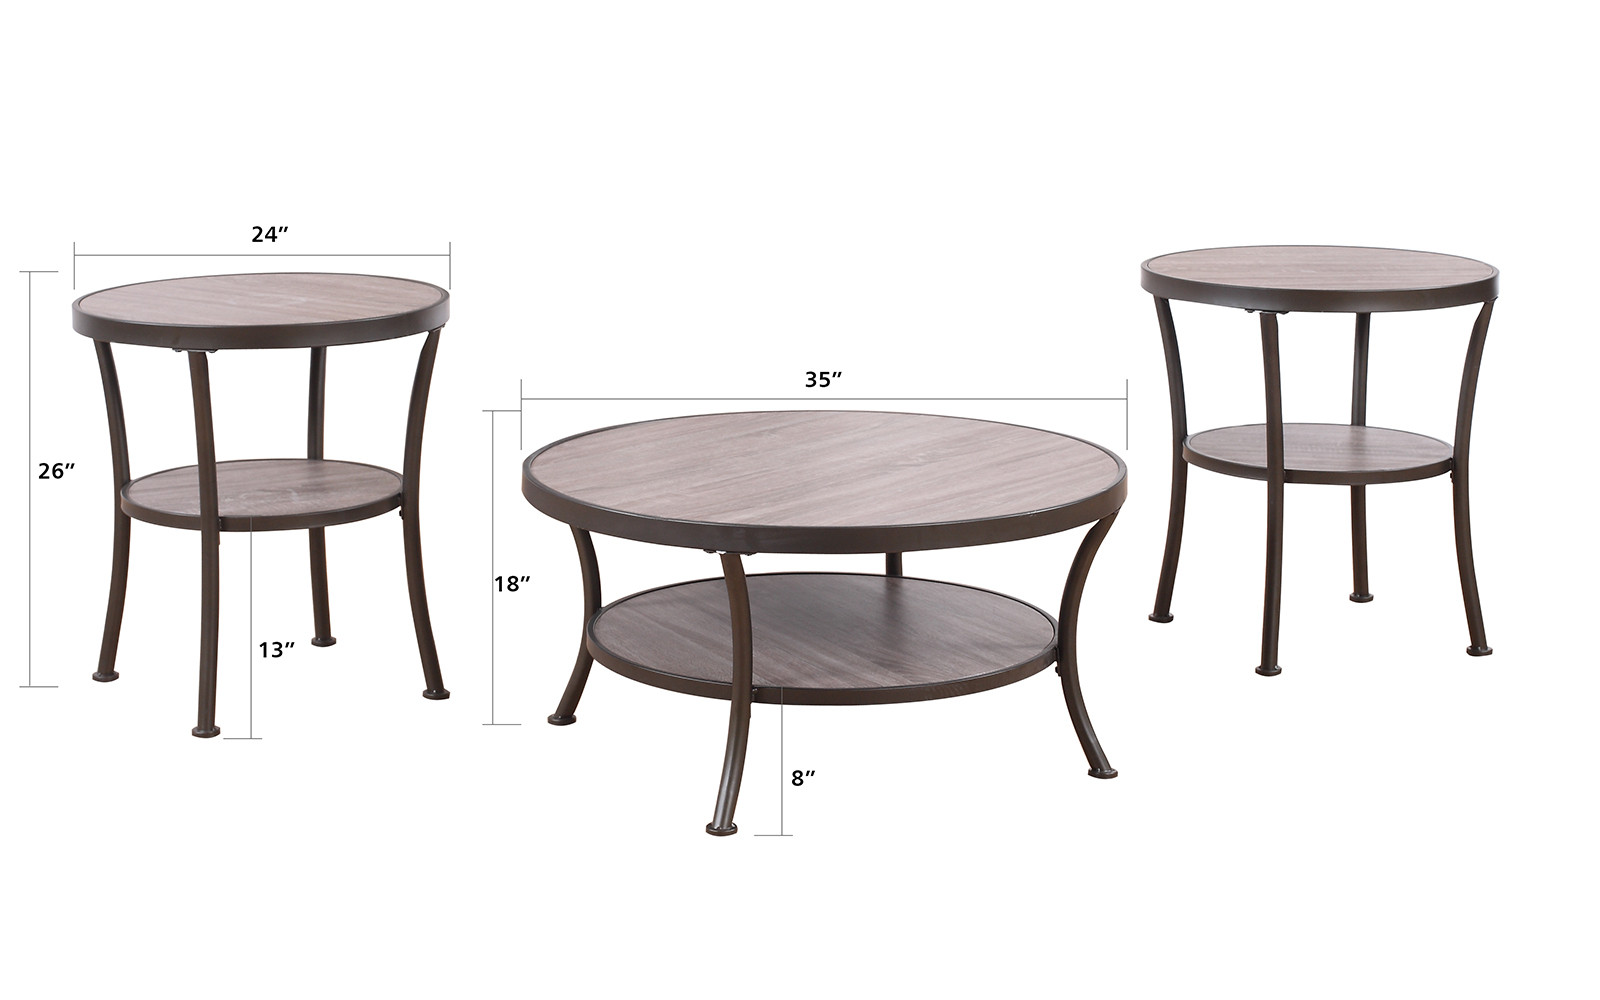 Round Living Room Table
 3 Piece Modern Round Coffee Table and 2 End Tables Living